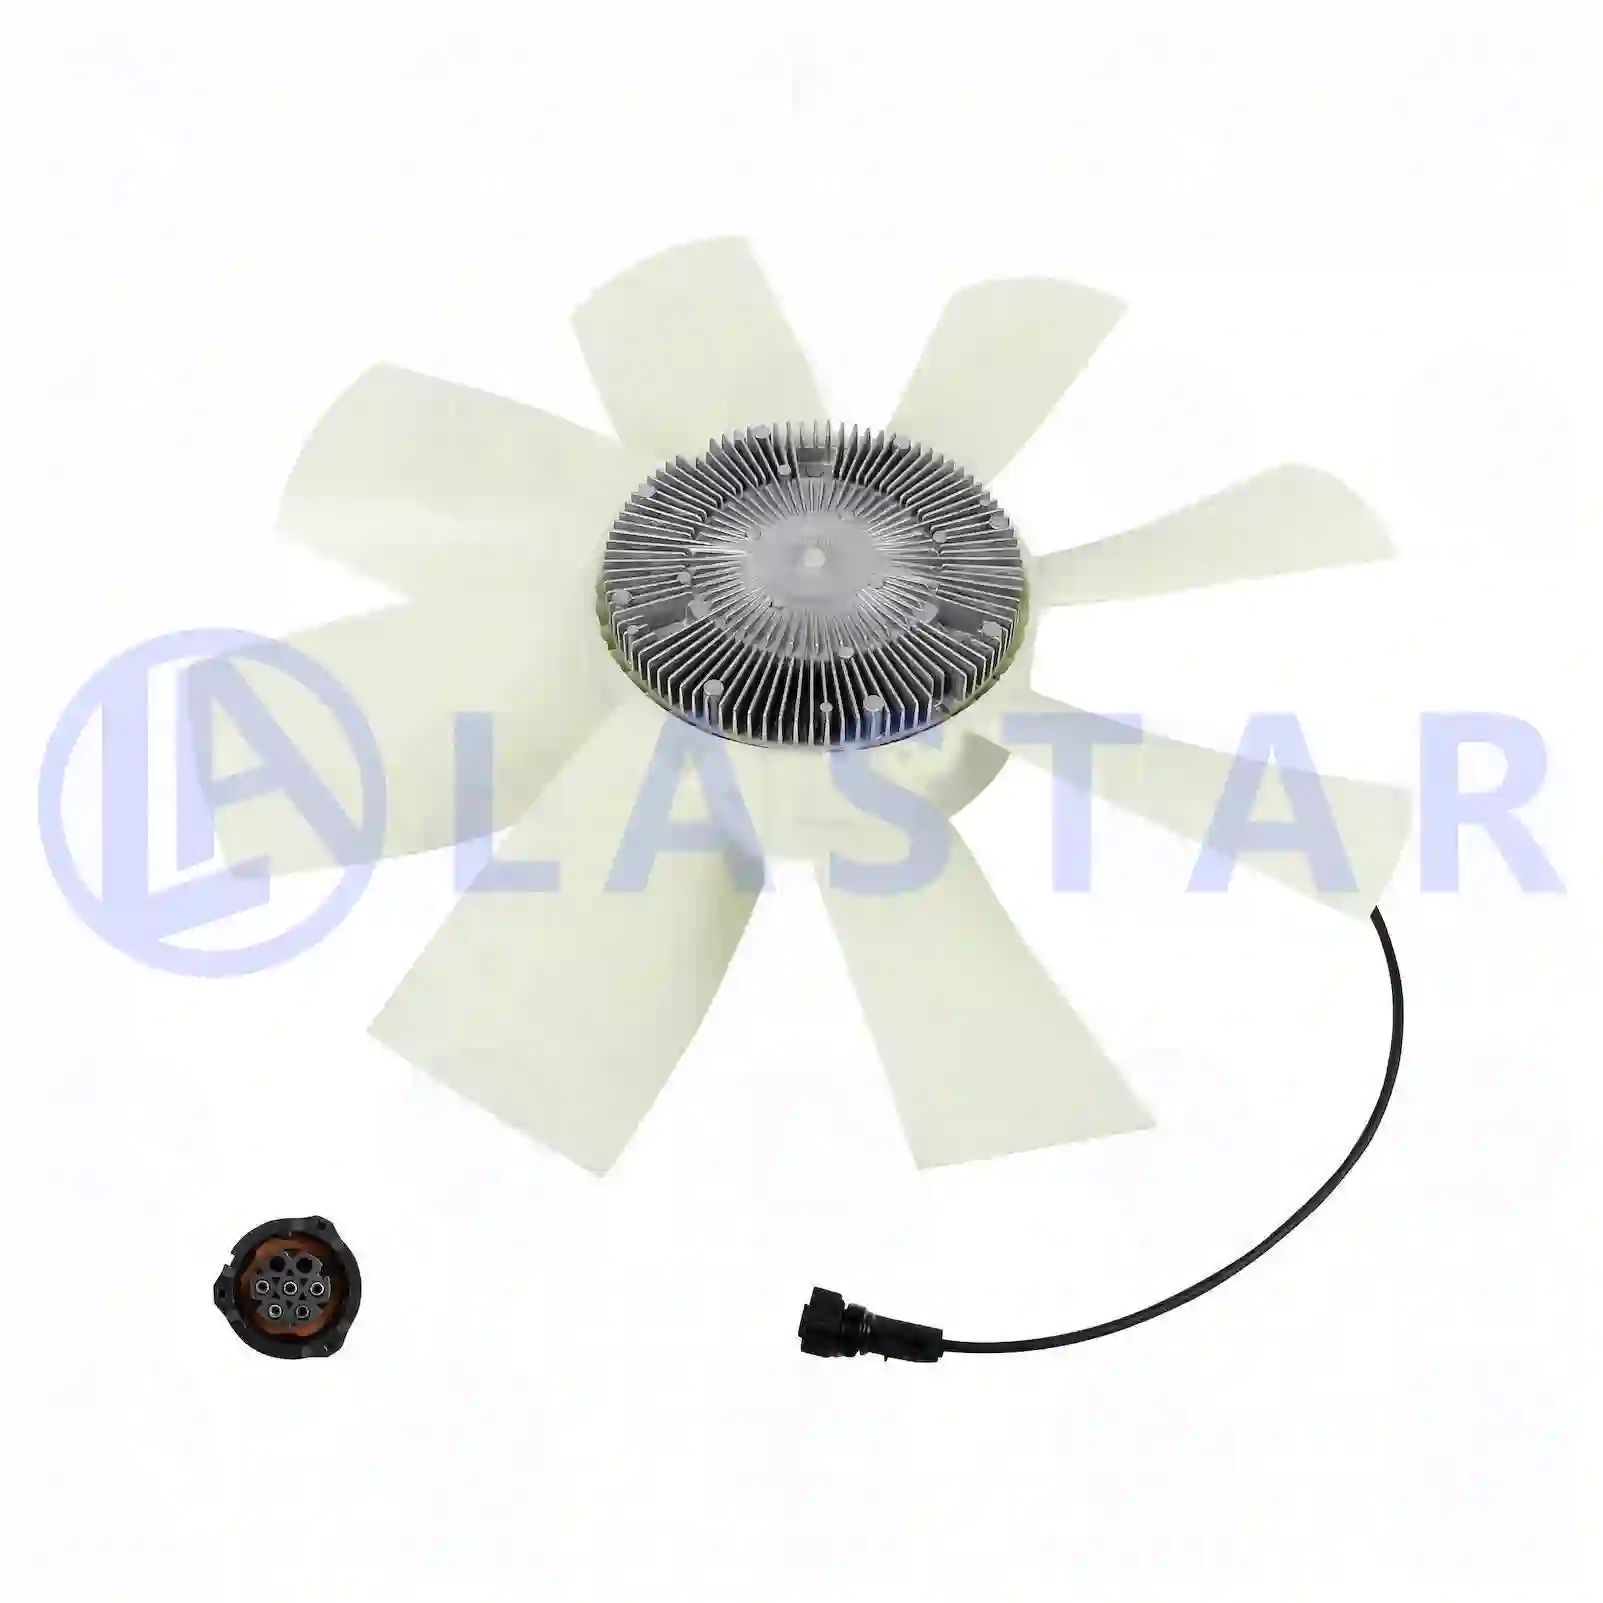 Fan with clutch, 77709420, 20450239, 85000177, ZG00402-0008 ||  77709420 Lastar Spare Part | Truck Spare Parts, Auotomotive Spare Parts Fan with clutch, 77709420, 20450239, 85000177, ZG00402-0008 ||  77709420 Lastar Spare Part | Truck Spare Parts, Auotomotive Spare Parts